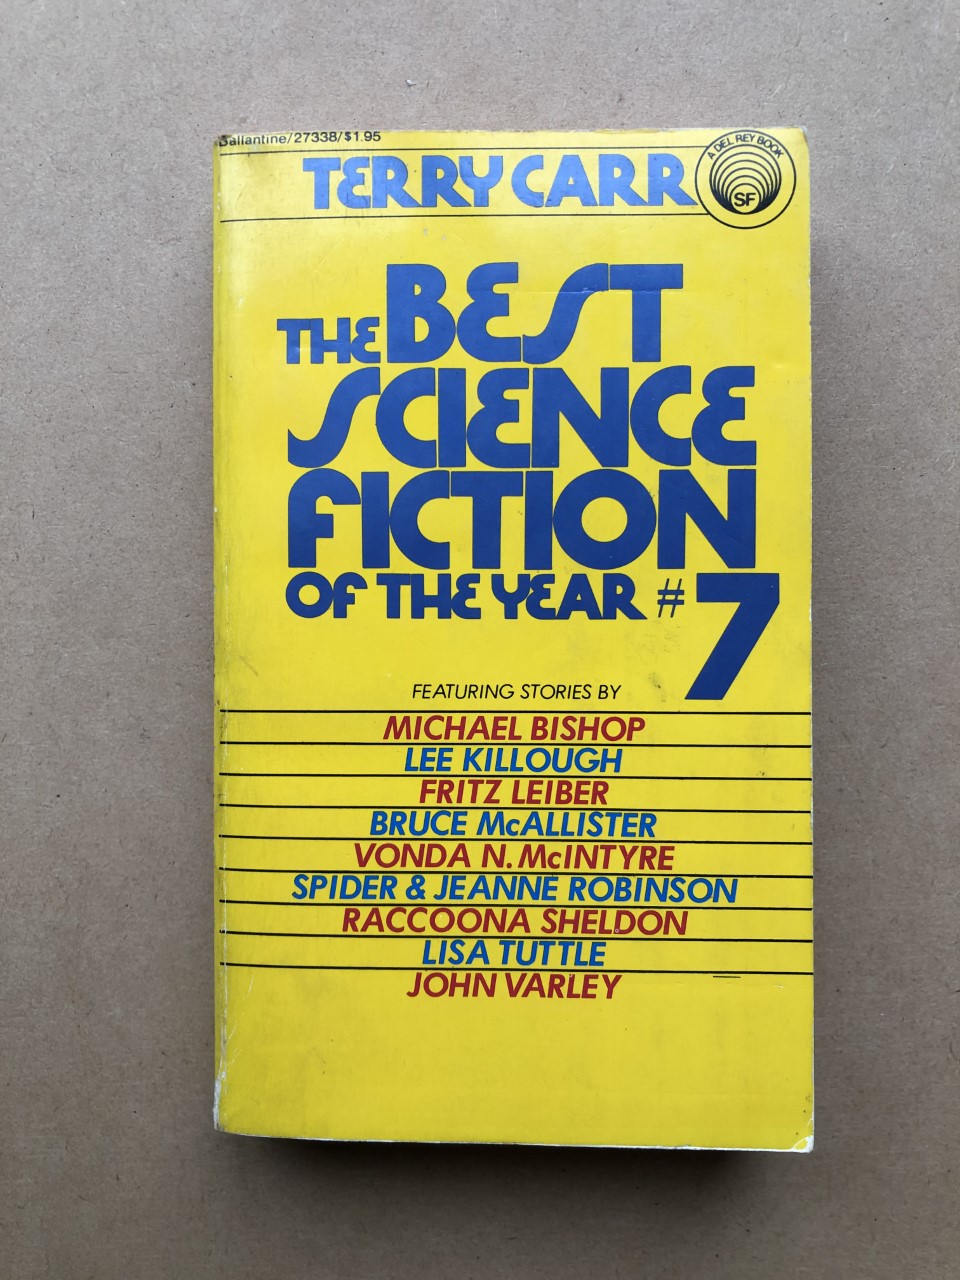 The Best Science Fiction of the Year #7: A Del Ray Book - Carr, Terry